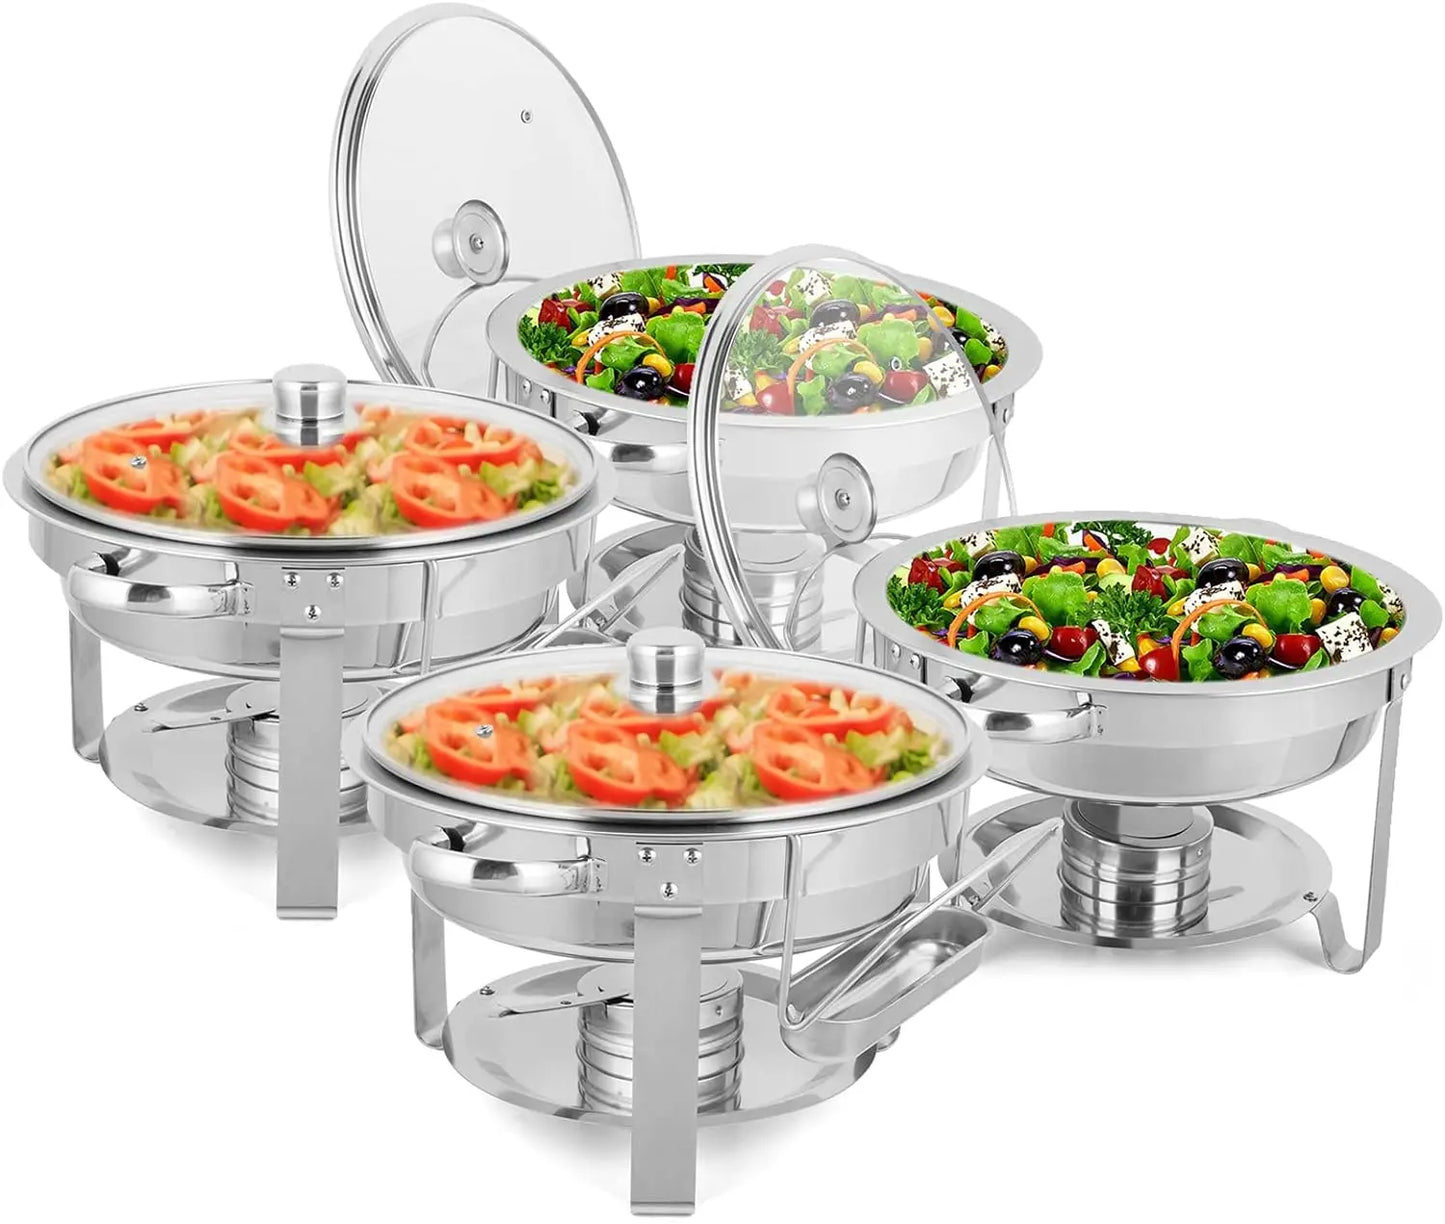 ROVSUN 5Qt 6 Pack Chafing Dish Buffet Set, NSF Stainless Steel Round Chafers for Catering, Buffet Servers and Warmers Set